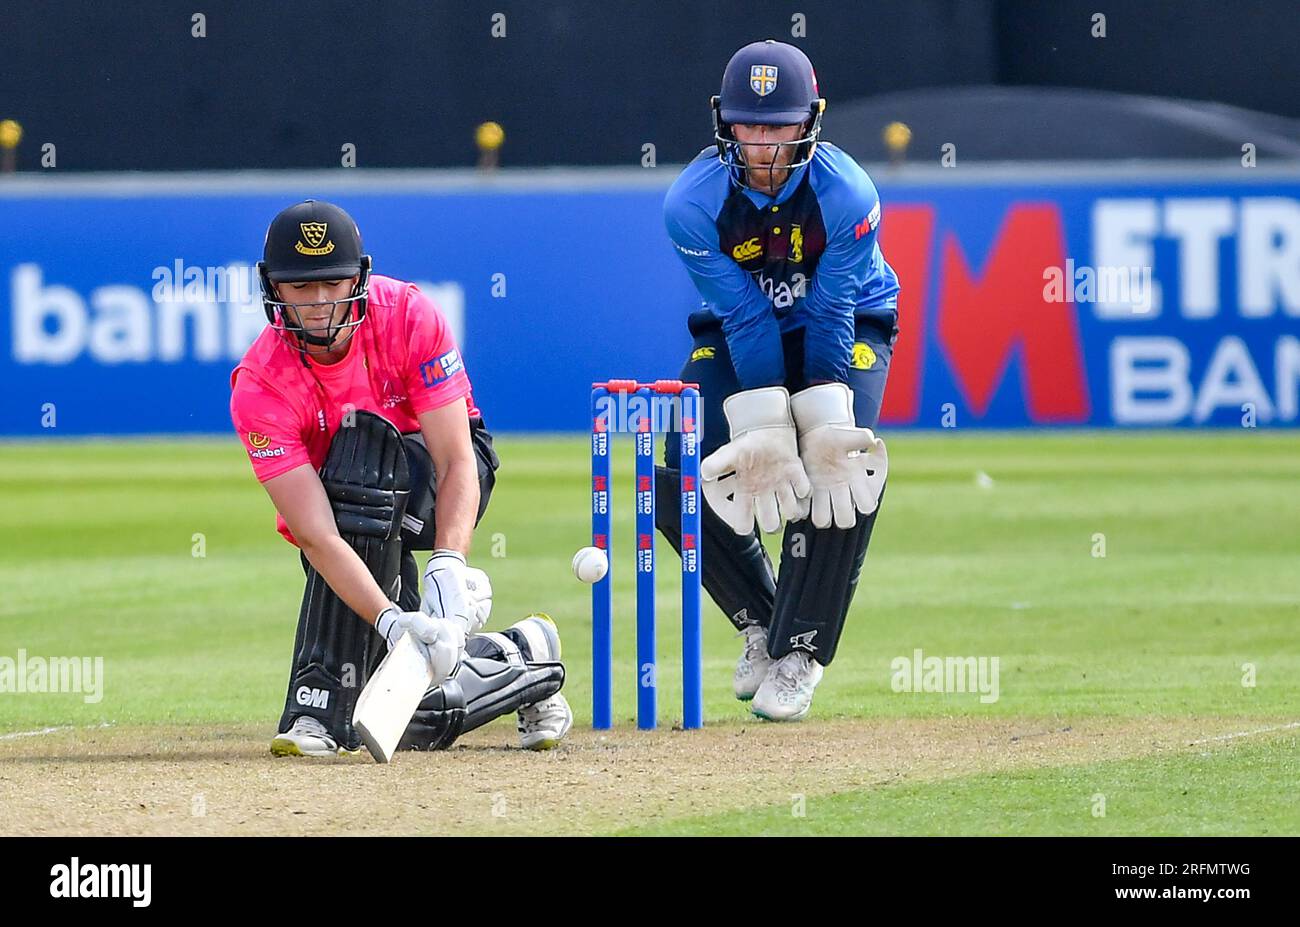 Hove UK 4th August 2023 -  James Coles batting for Sussex Sharks against Durham during the Metro Bank One Day Cup cricket match at the 1st Central County Ground in Hove : Credit Simon Dack /TPI/ Alamy Live News Stock Photo